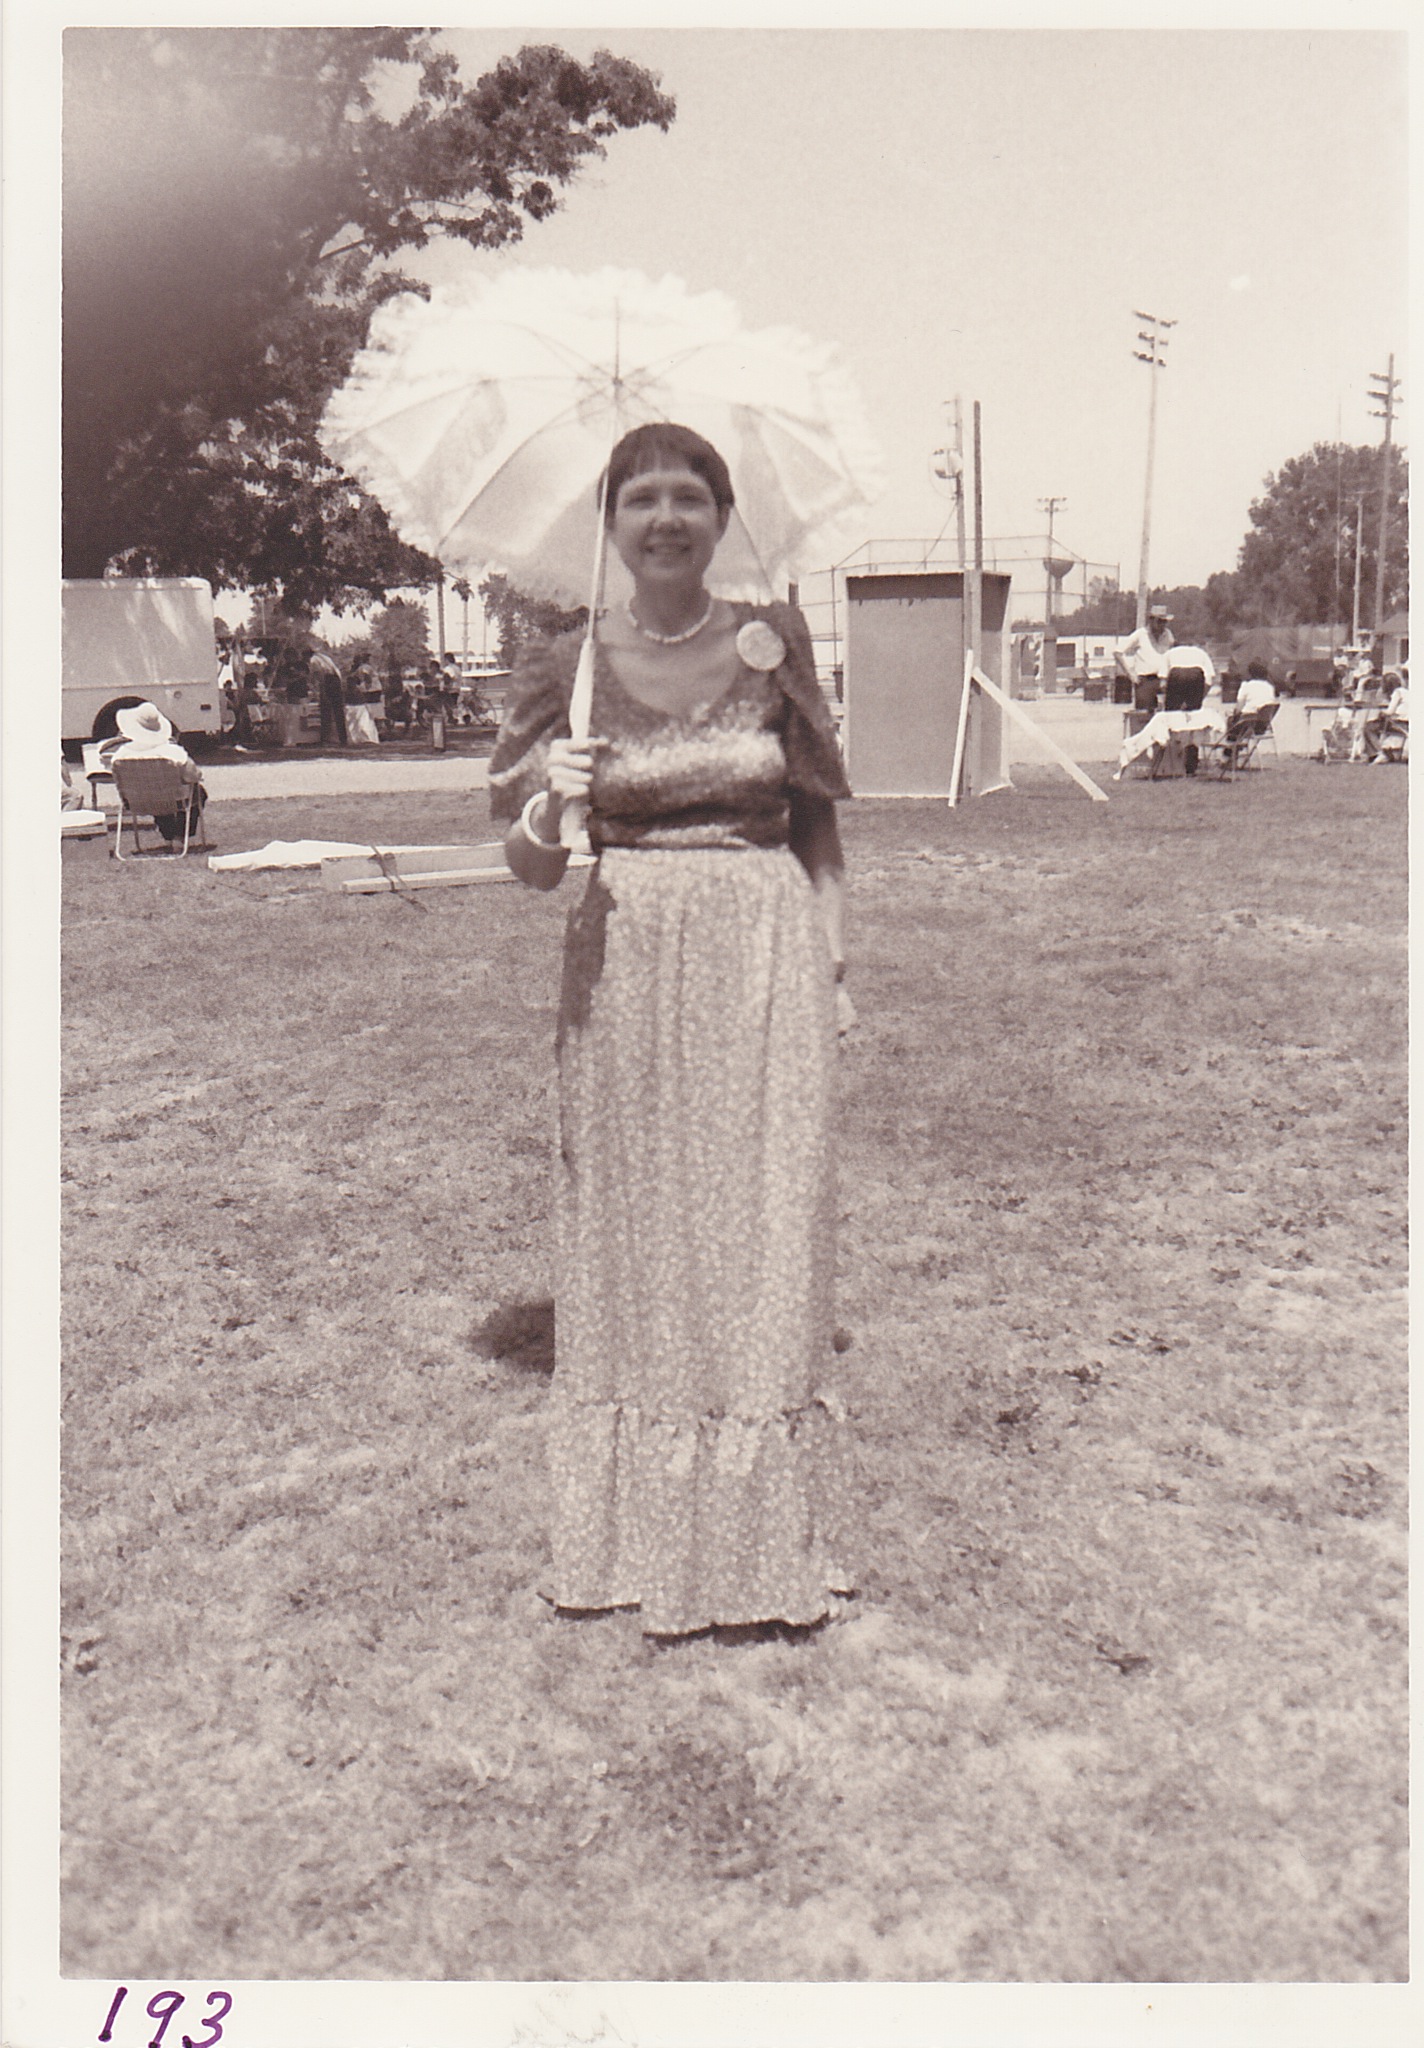 Annabelle Closson served as general chairman of the sesquicentennial activities.  She was a member of the Town & Country Festival organization.